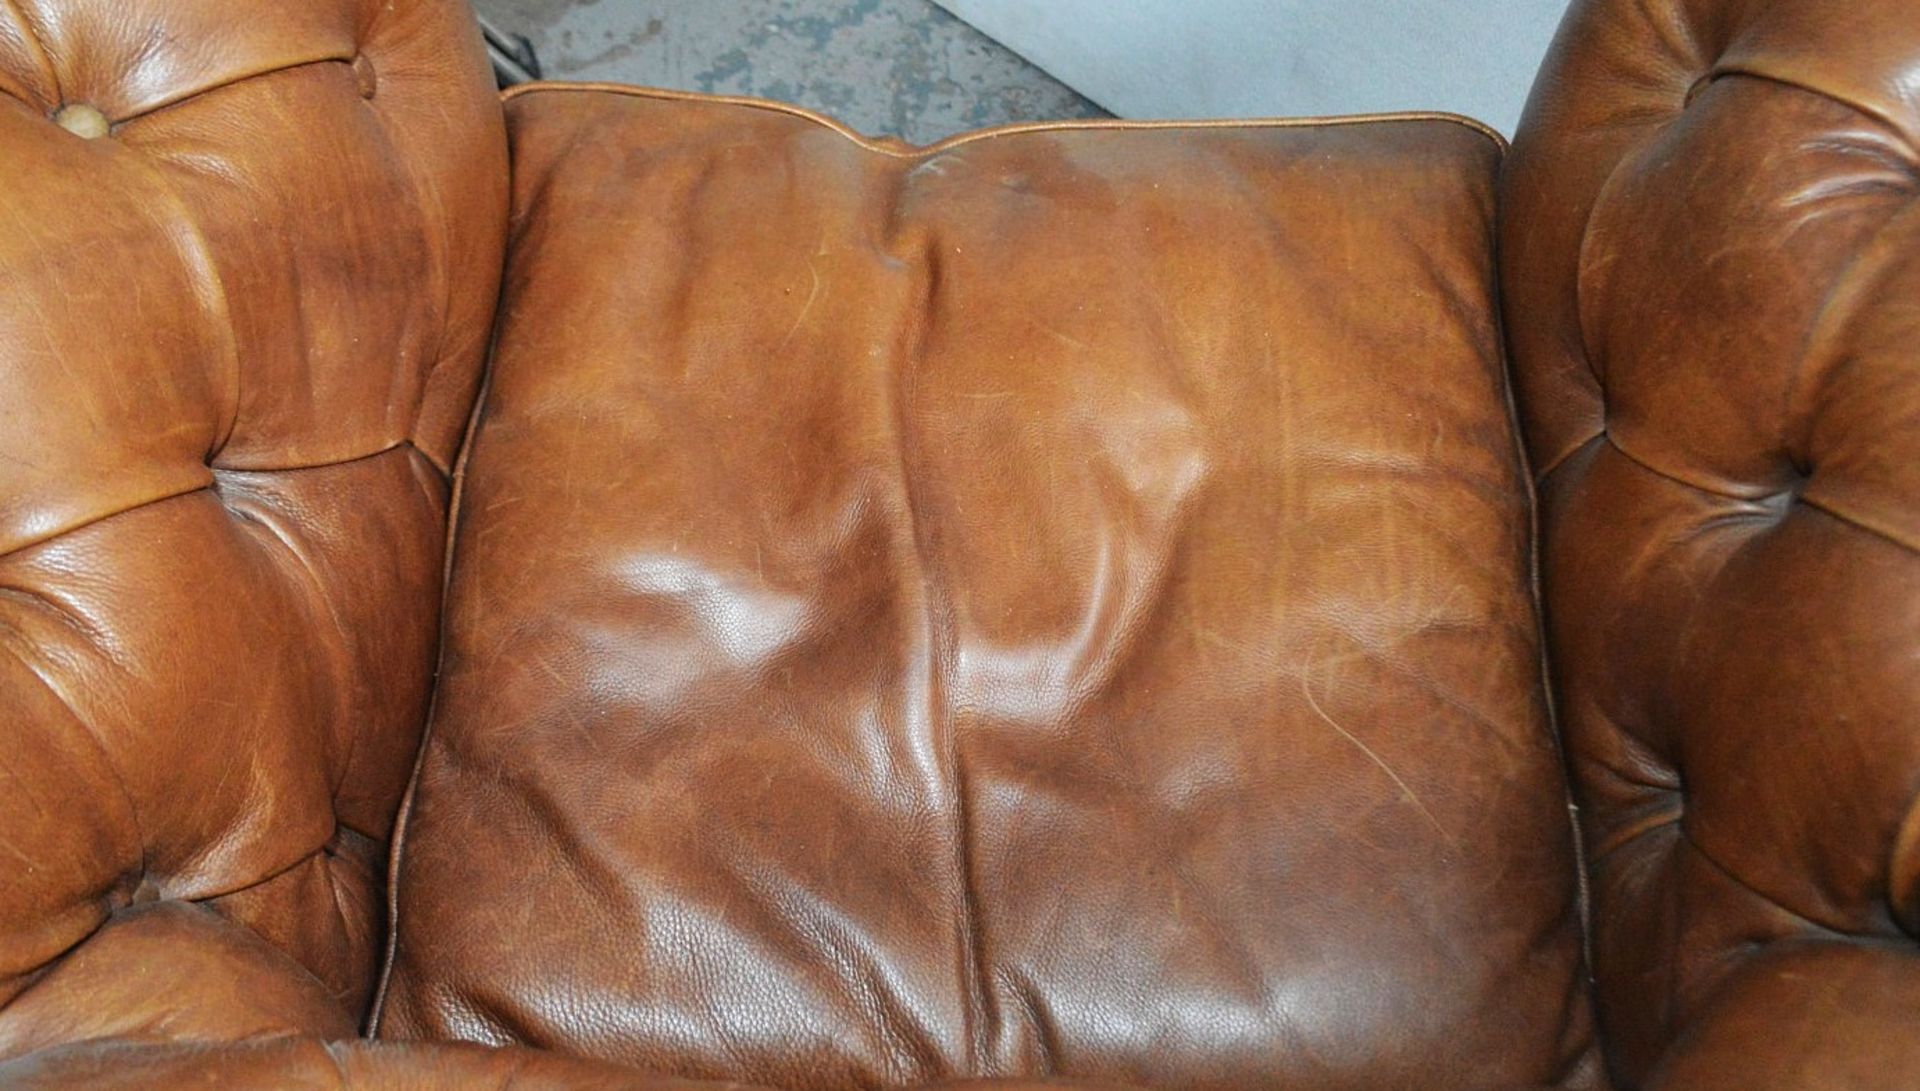 1 x Vintage-style Large Leather Chesterfield Armchair Featuring A Distressed Finish - Image 3 of 6